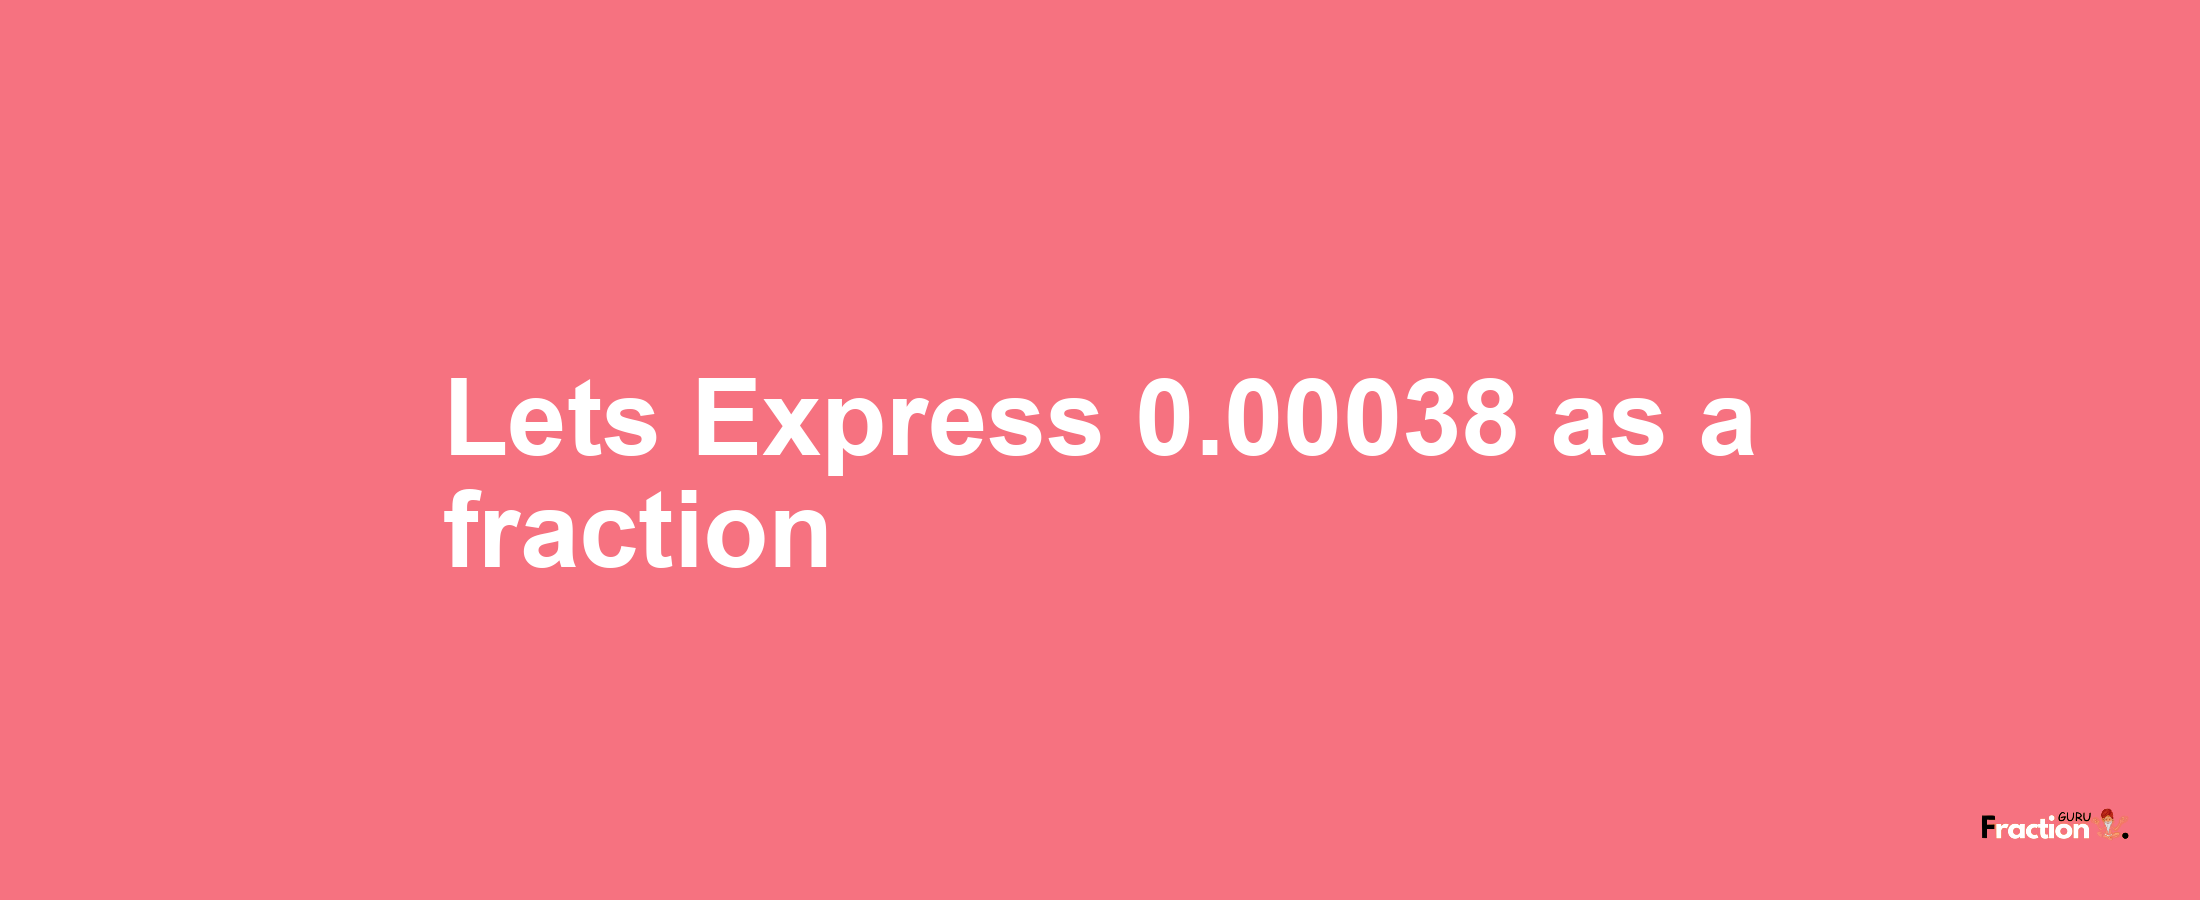 Lets Express 0.00038 as afraction